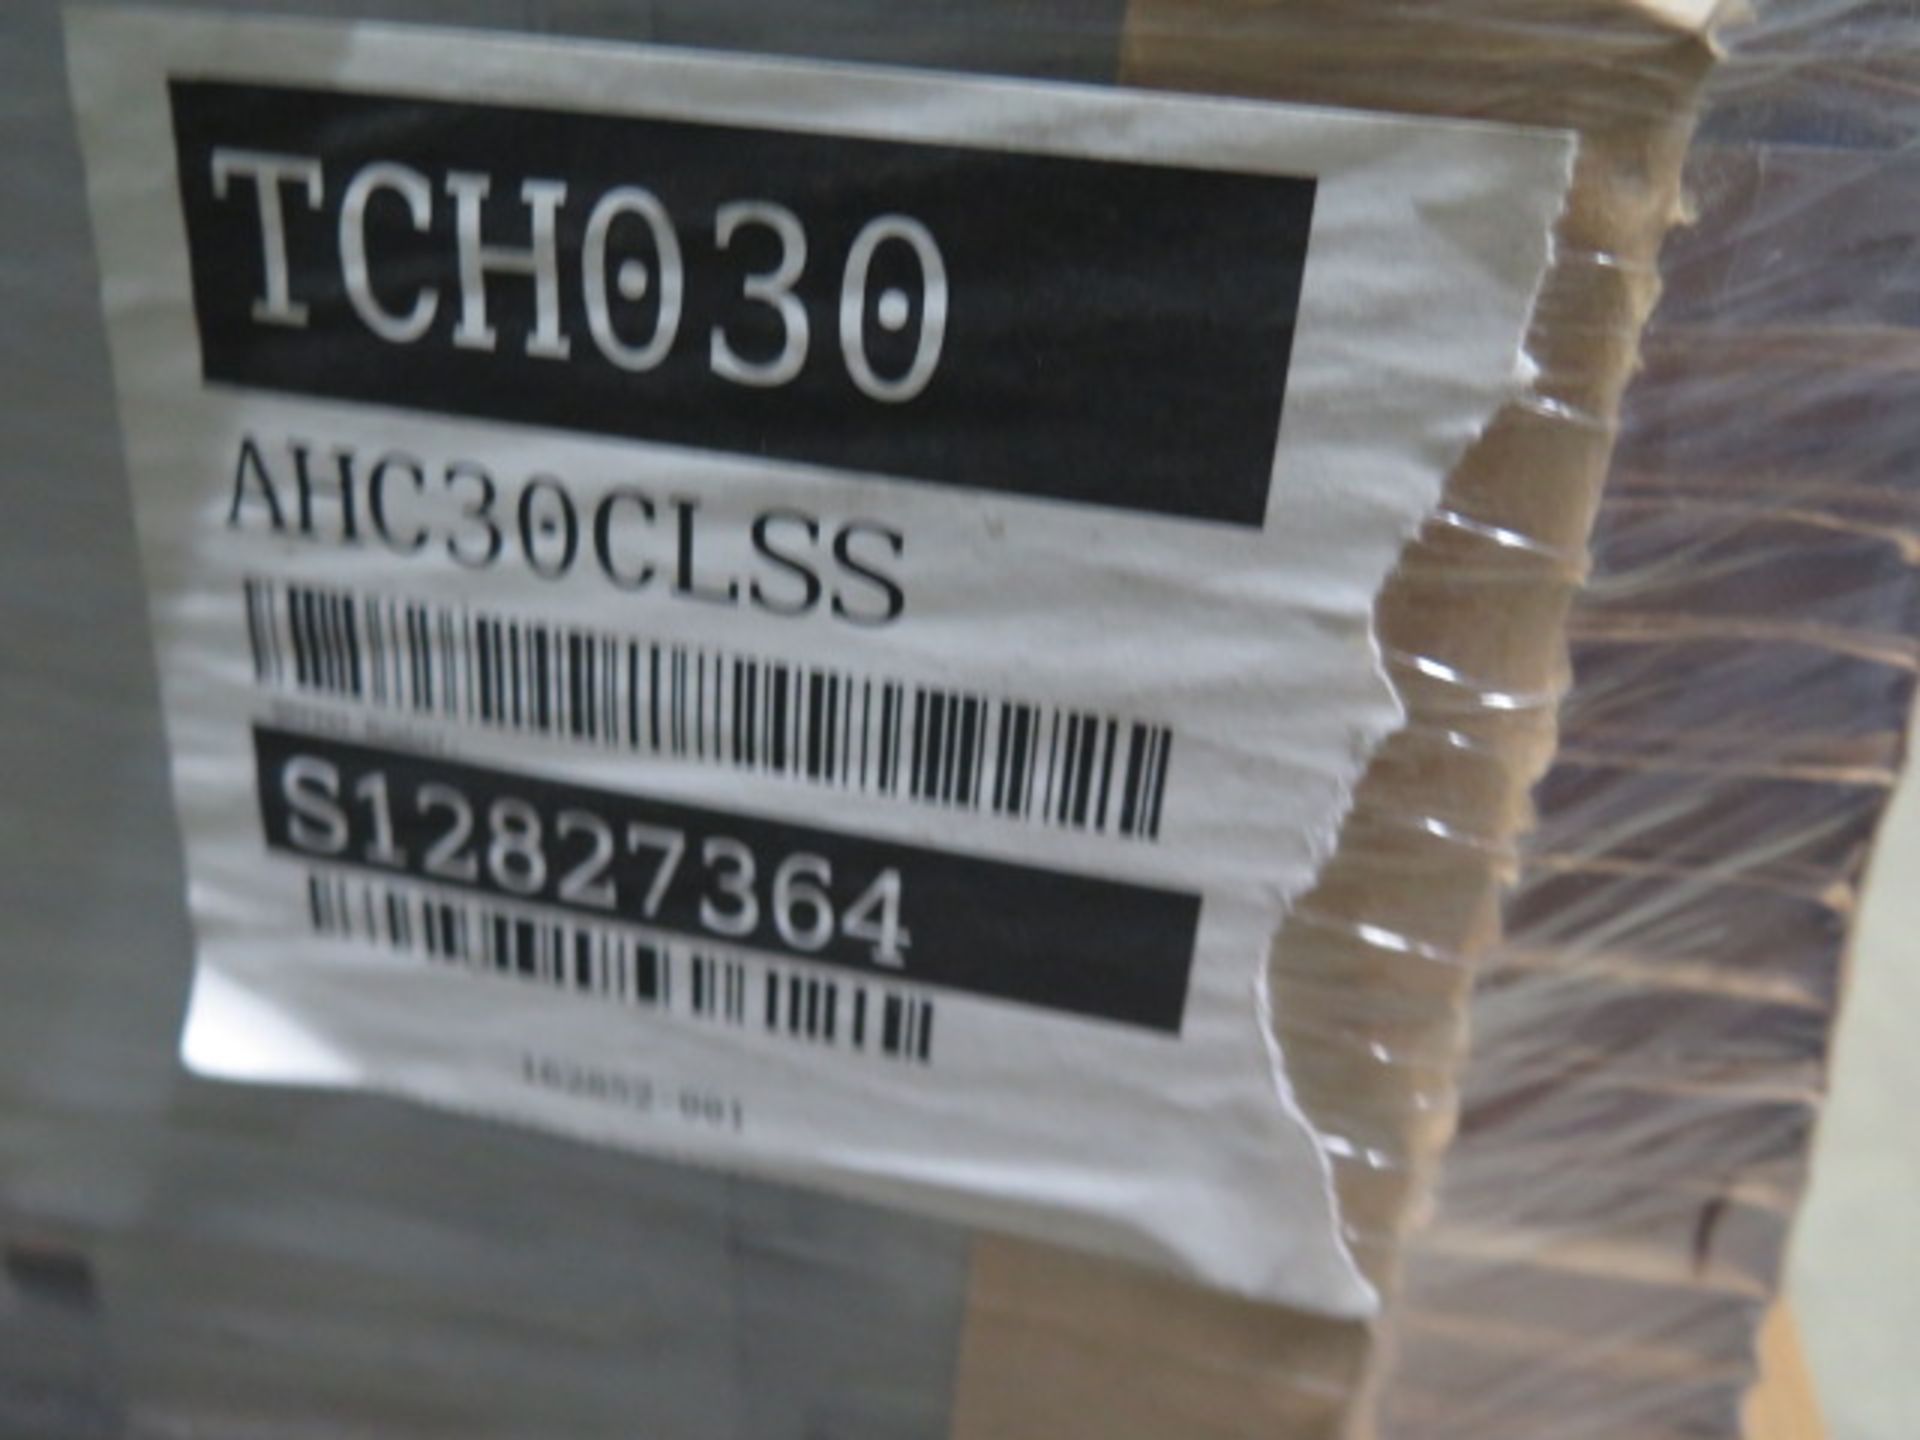 Climate Master TCH030AHC30CLSS 2.5 Ton Unit s/n S12827364 208/230V-3PH. (SOLD AS-IS - NO WARRANTY) - Image 3 of 5